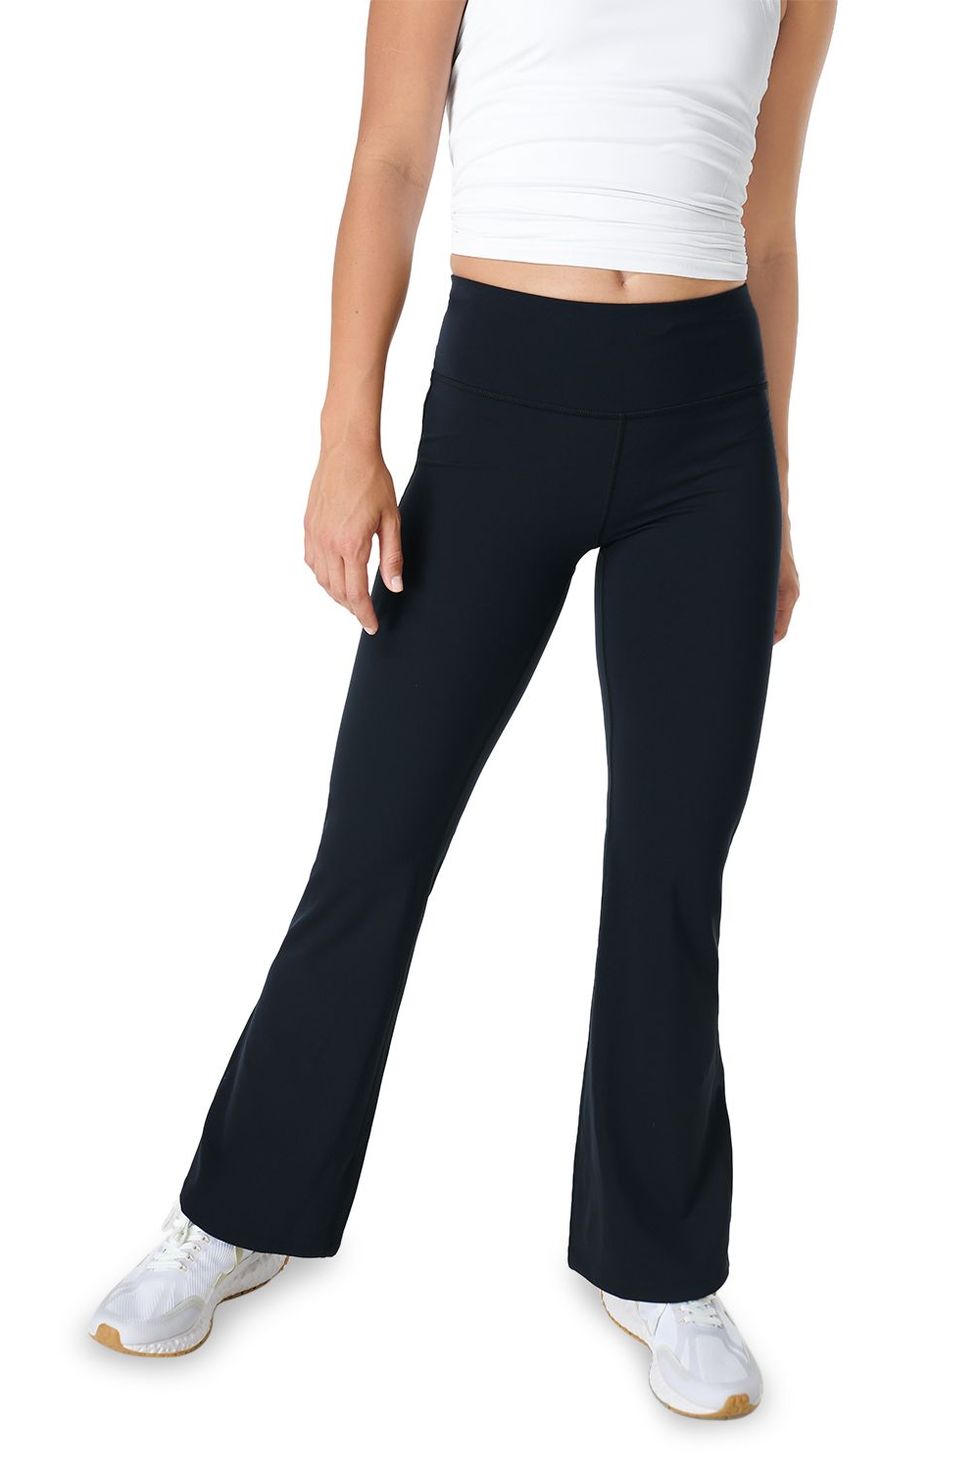 Flare Leggings with Fron Slit